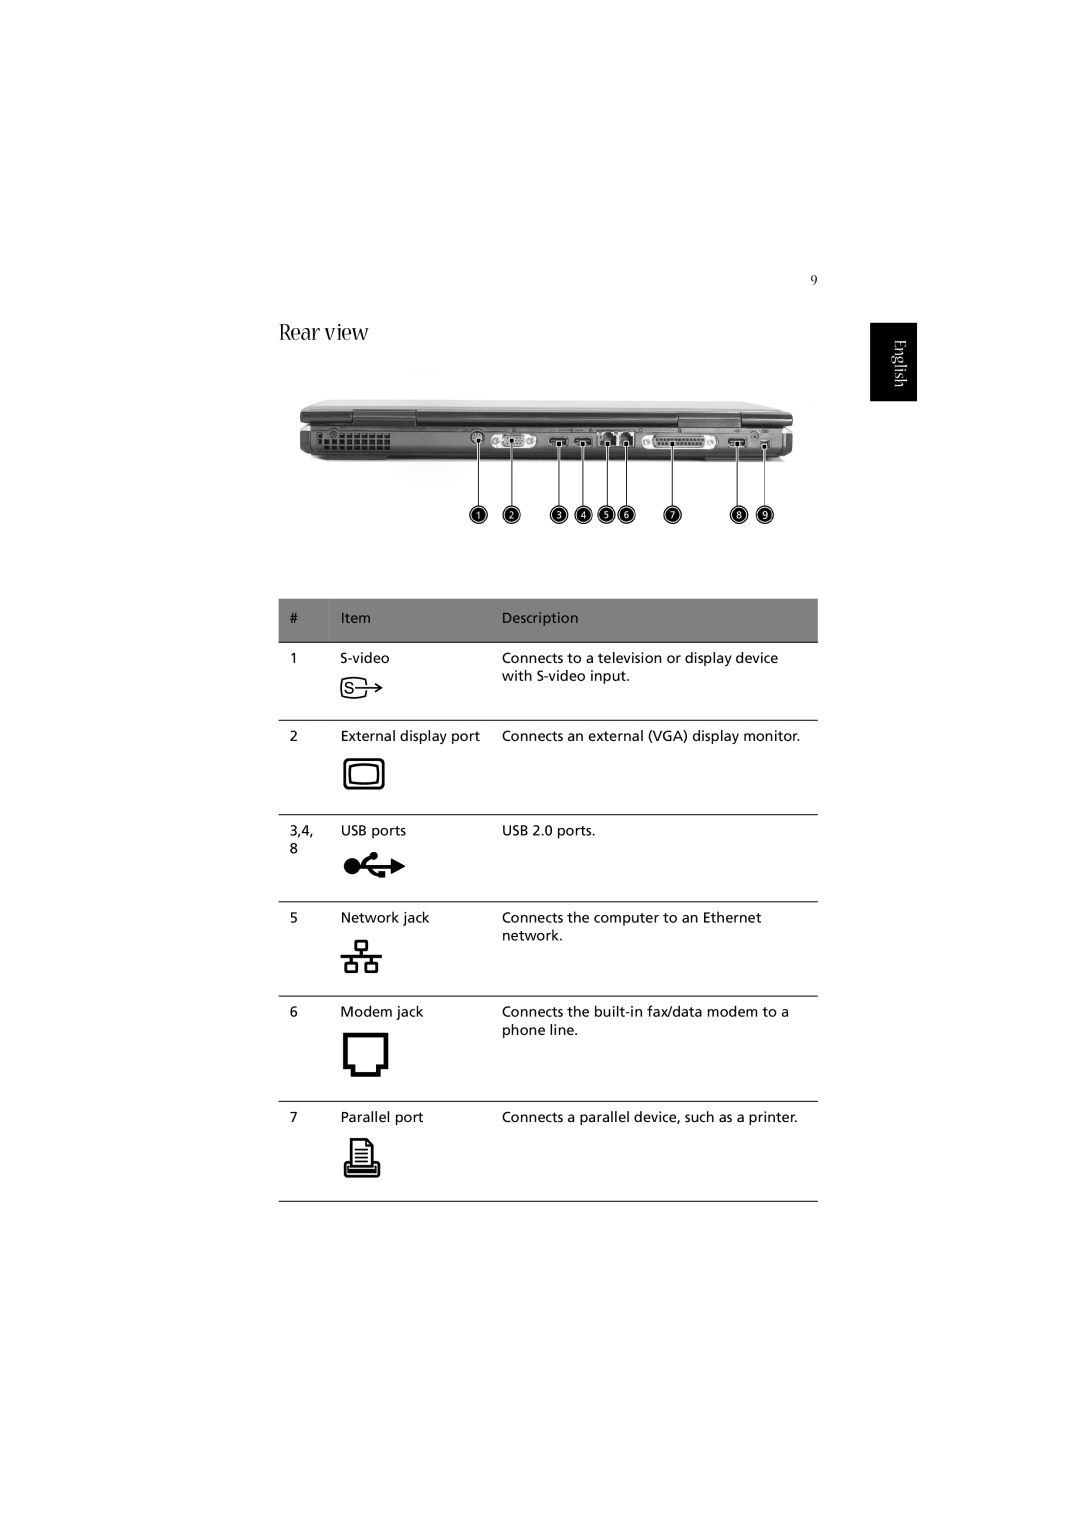 Acer 2010 manual Rear view, English 